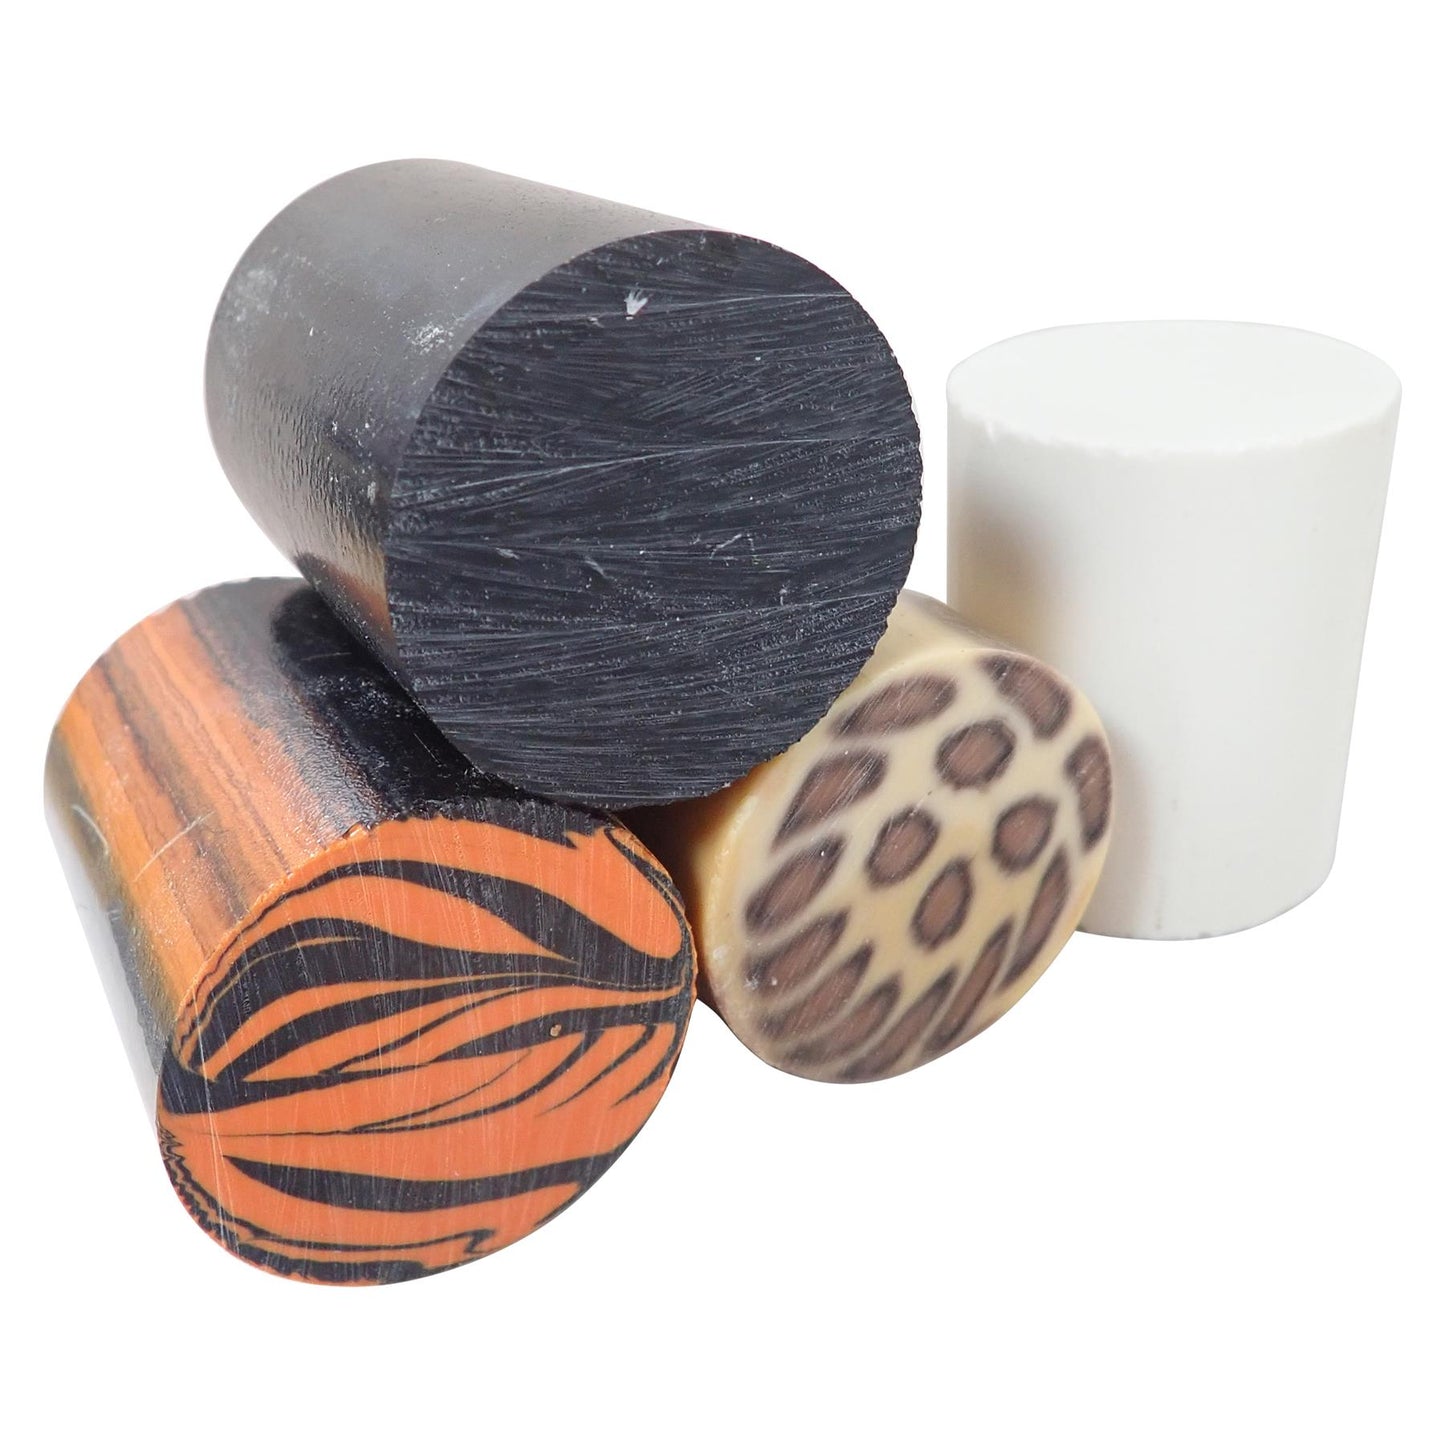 [Turners' Mill] Animal Mixed Polyester Turning Blanks - 63.5x50x50mm, Set of 4